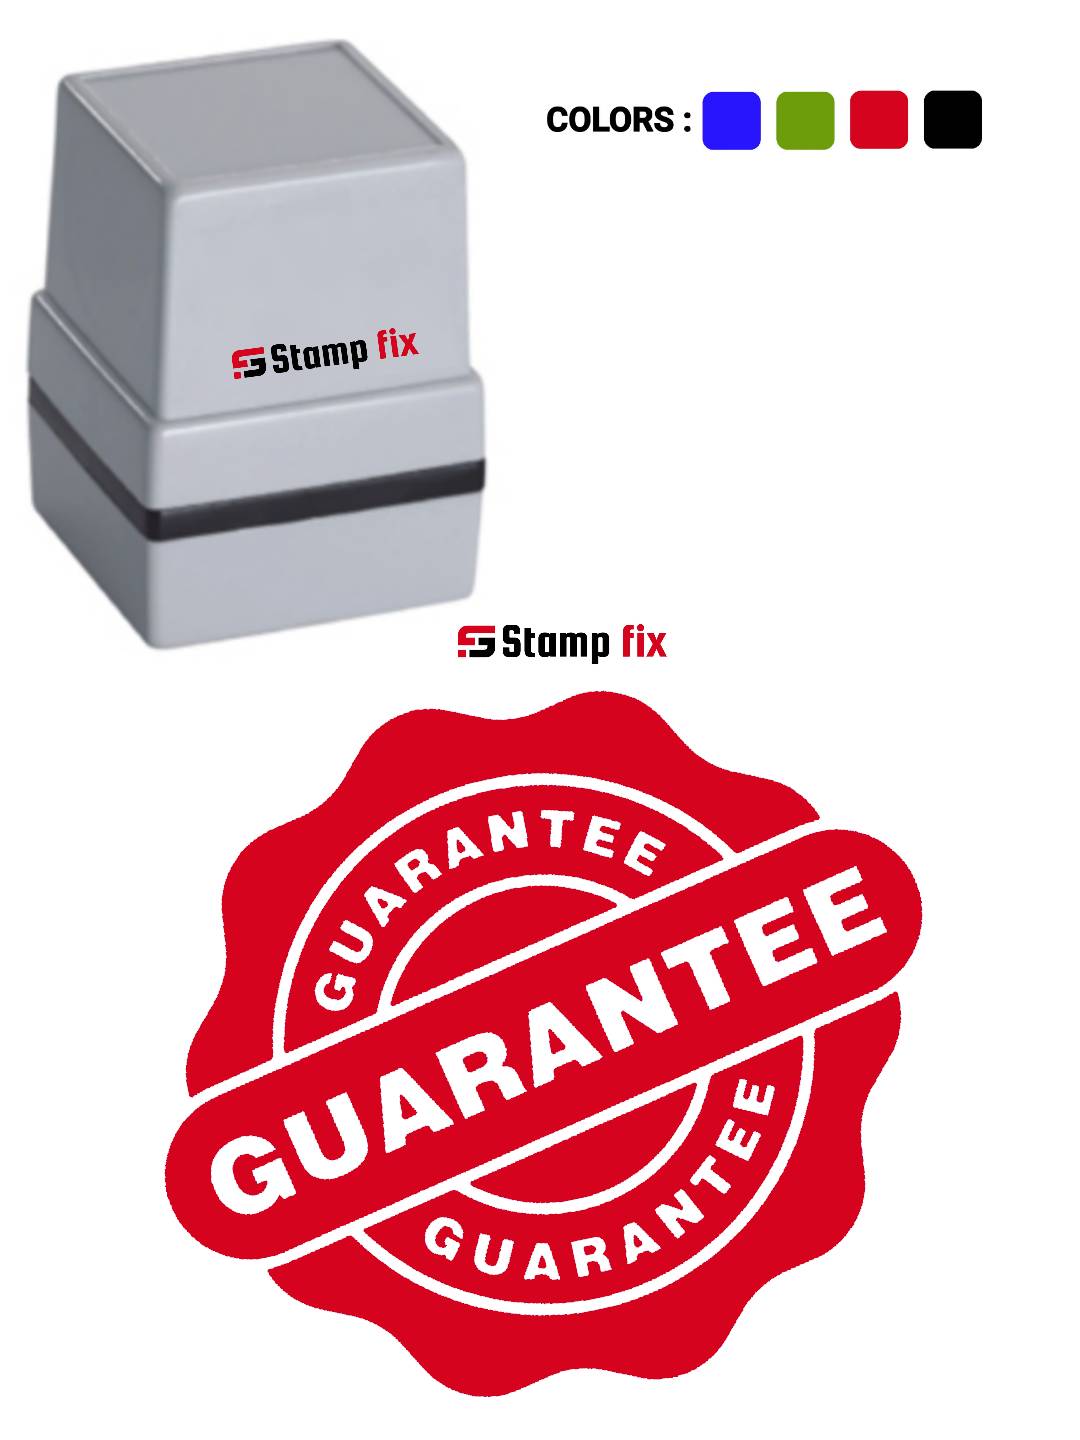 Pre Ink Guarantee Stamp by StampFix, a self-inking stamp with high-quality impressions
in India, nylon stamp, rubber stamp, pre ink stamp, polymer stamp, urgent stamp